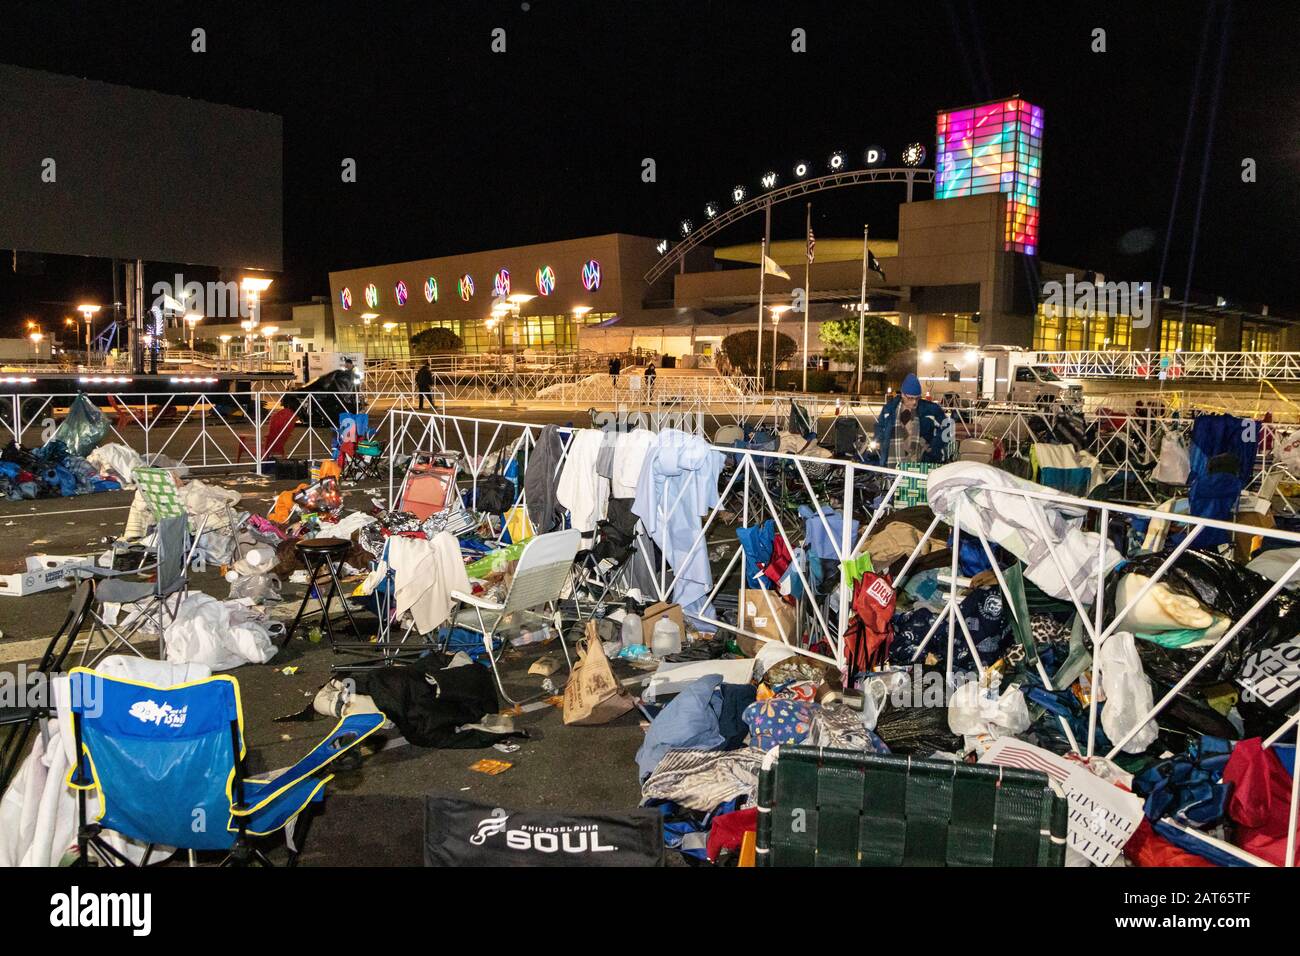 Chairs, blankets, and garbage left behind in the waiting and overflow area of the 'Keep America Great' rally; as seen after the event's completion. Stock Photo